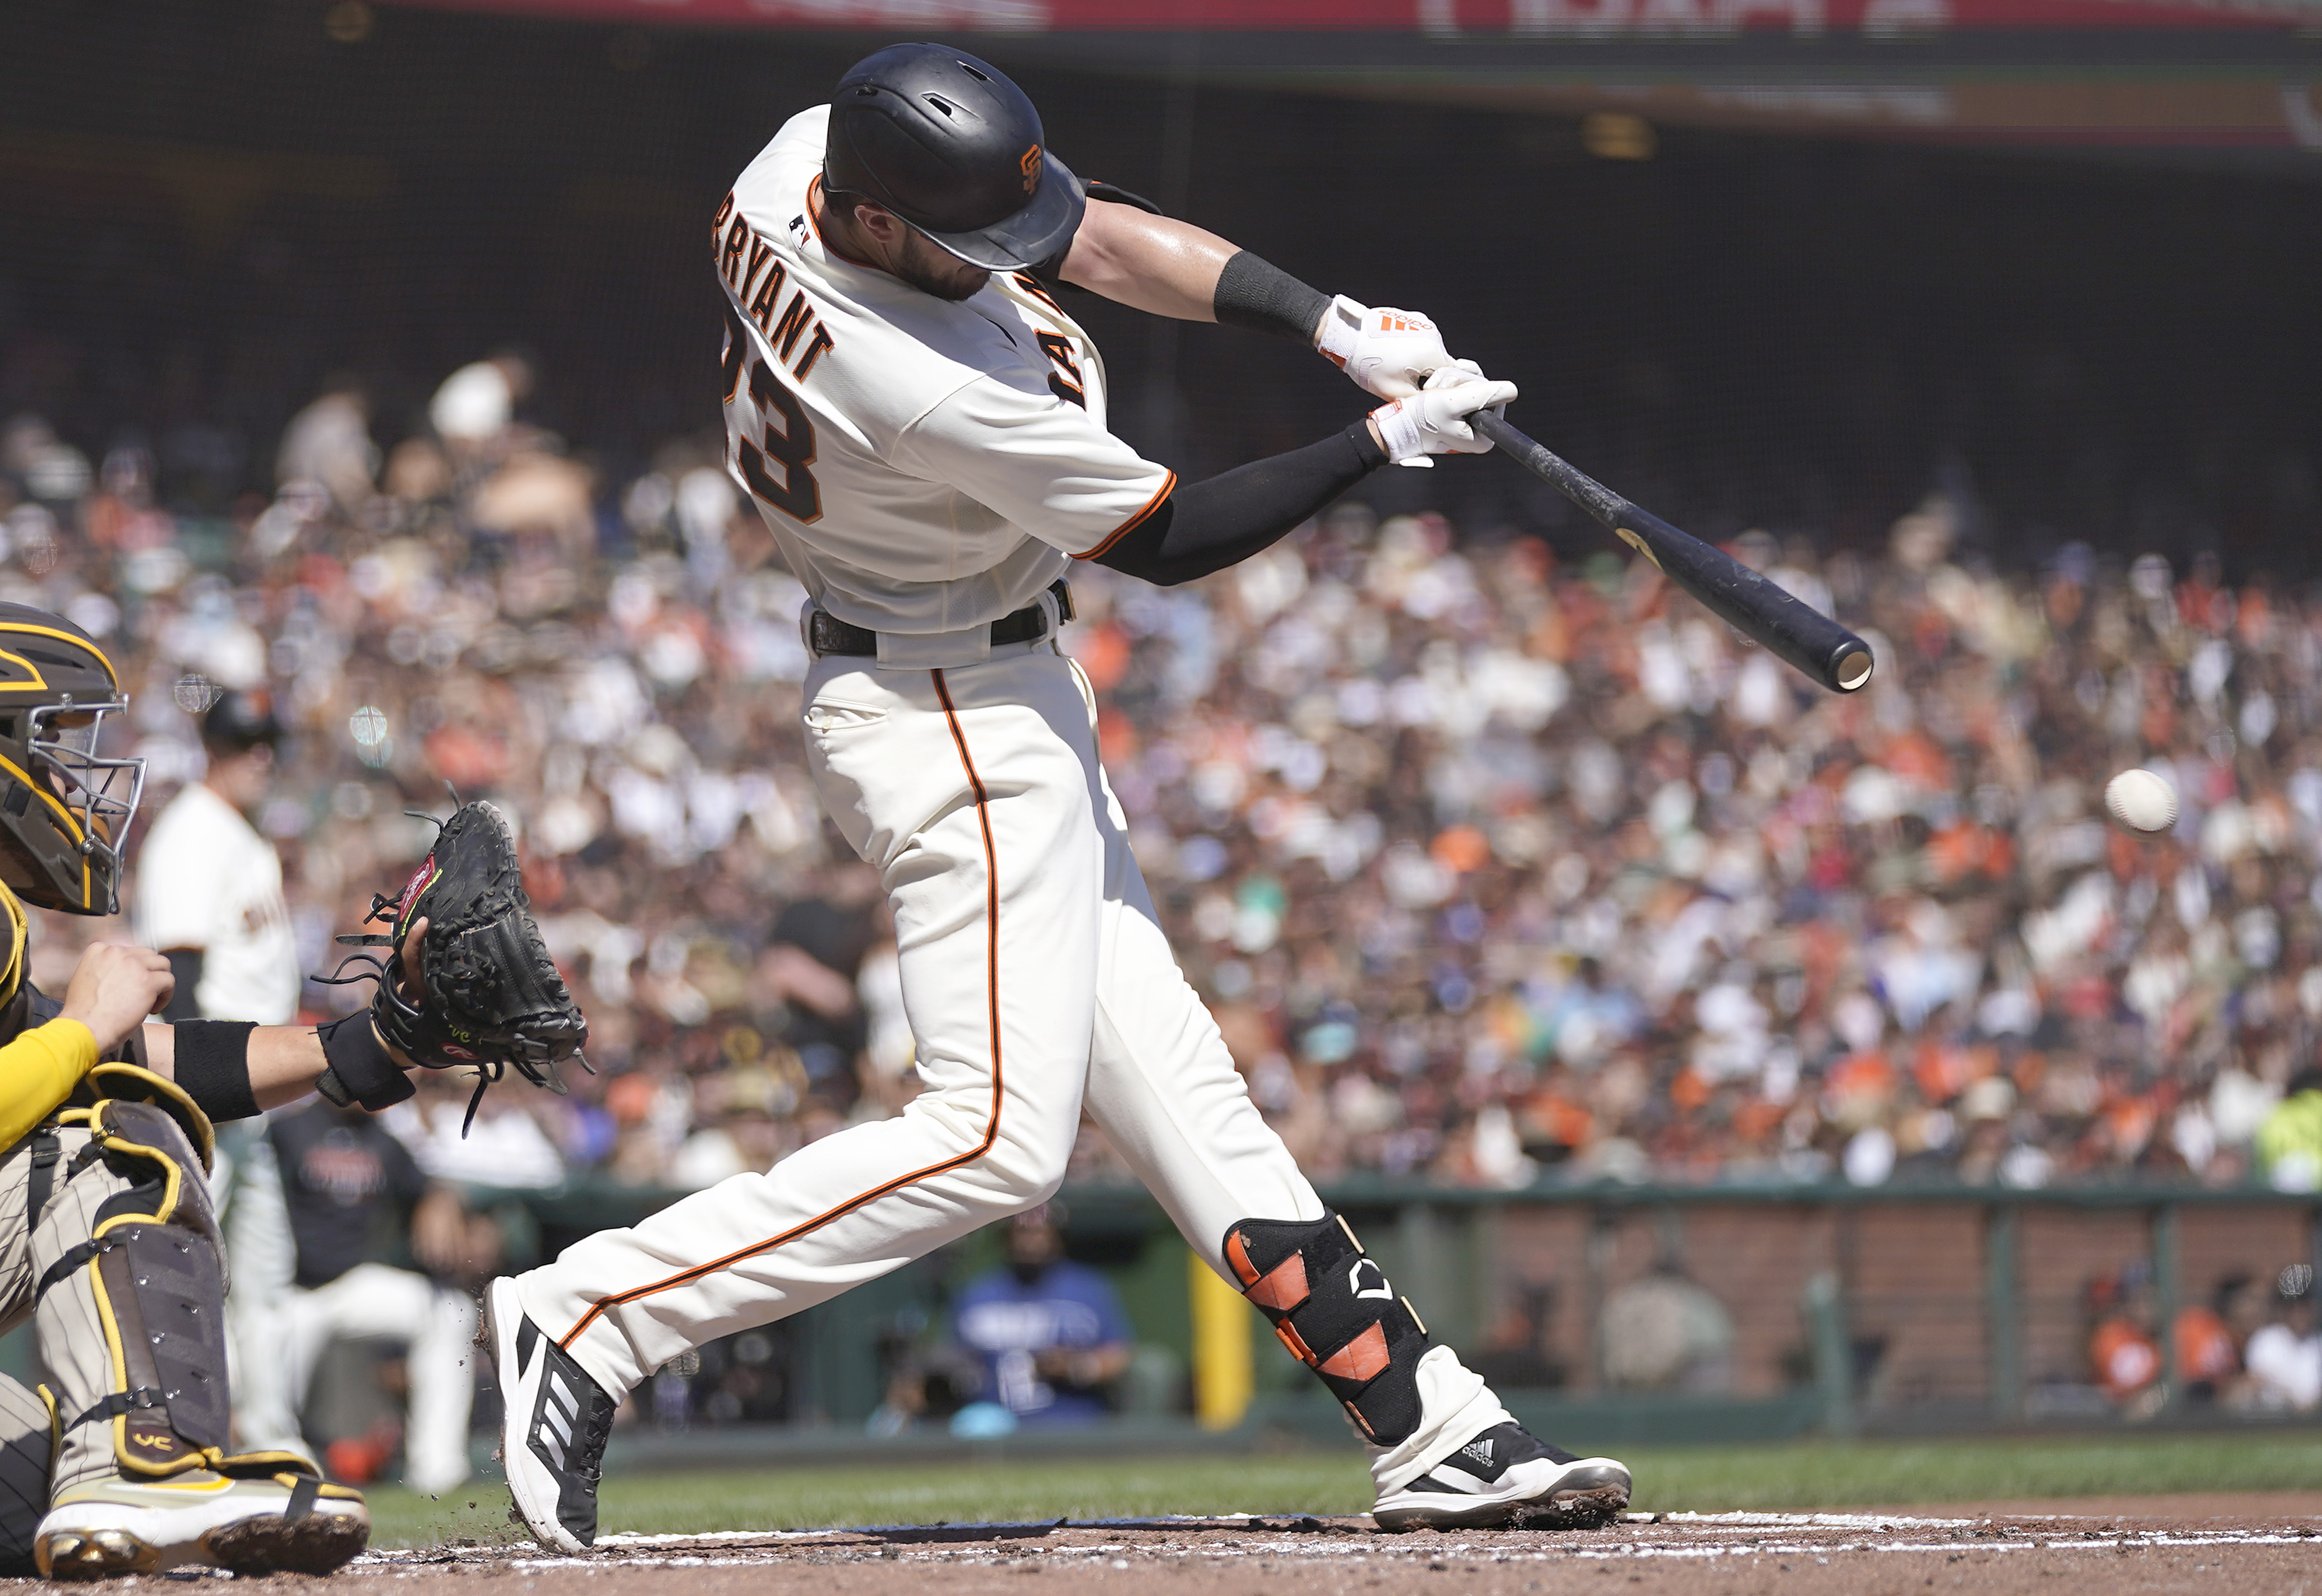 Giants Miss Chance To Clinch NL West, Fall To Padres In 10th